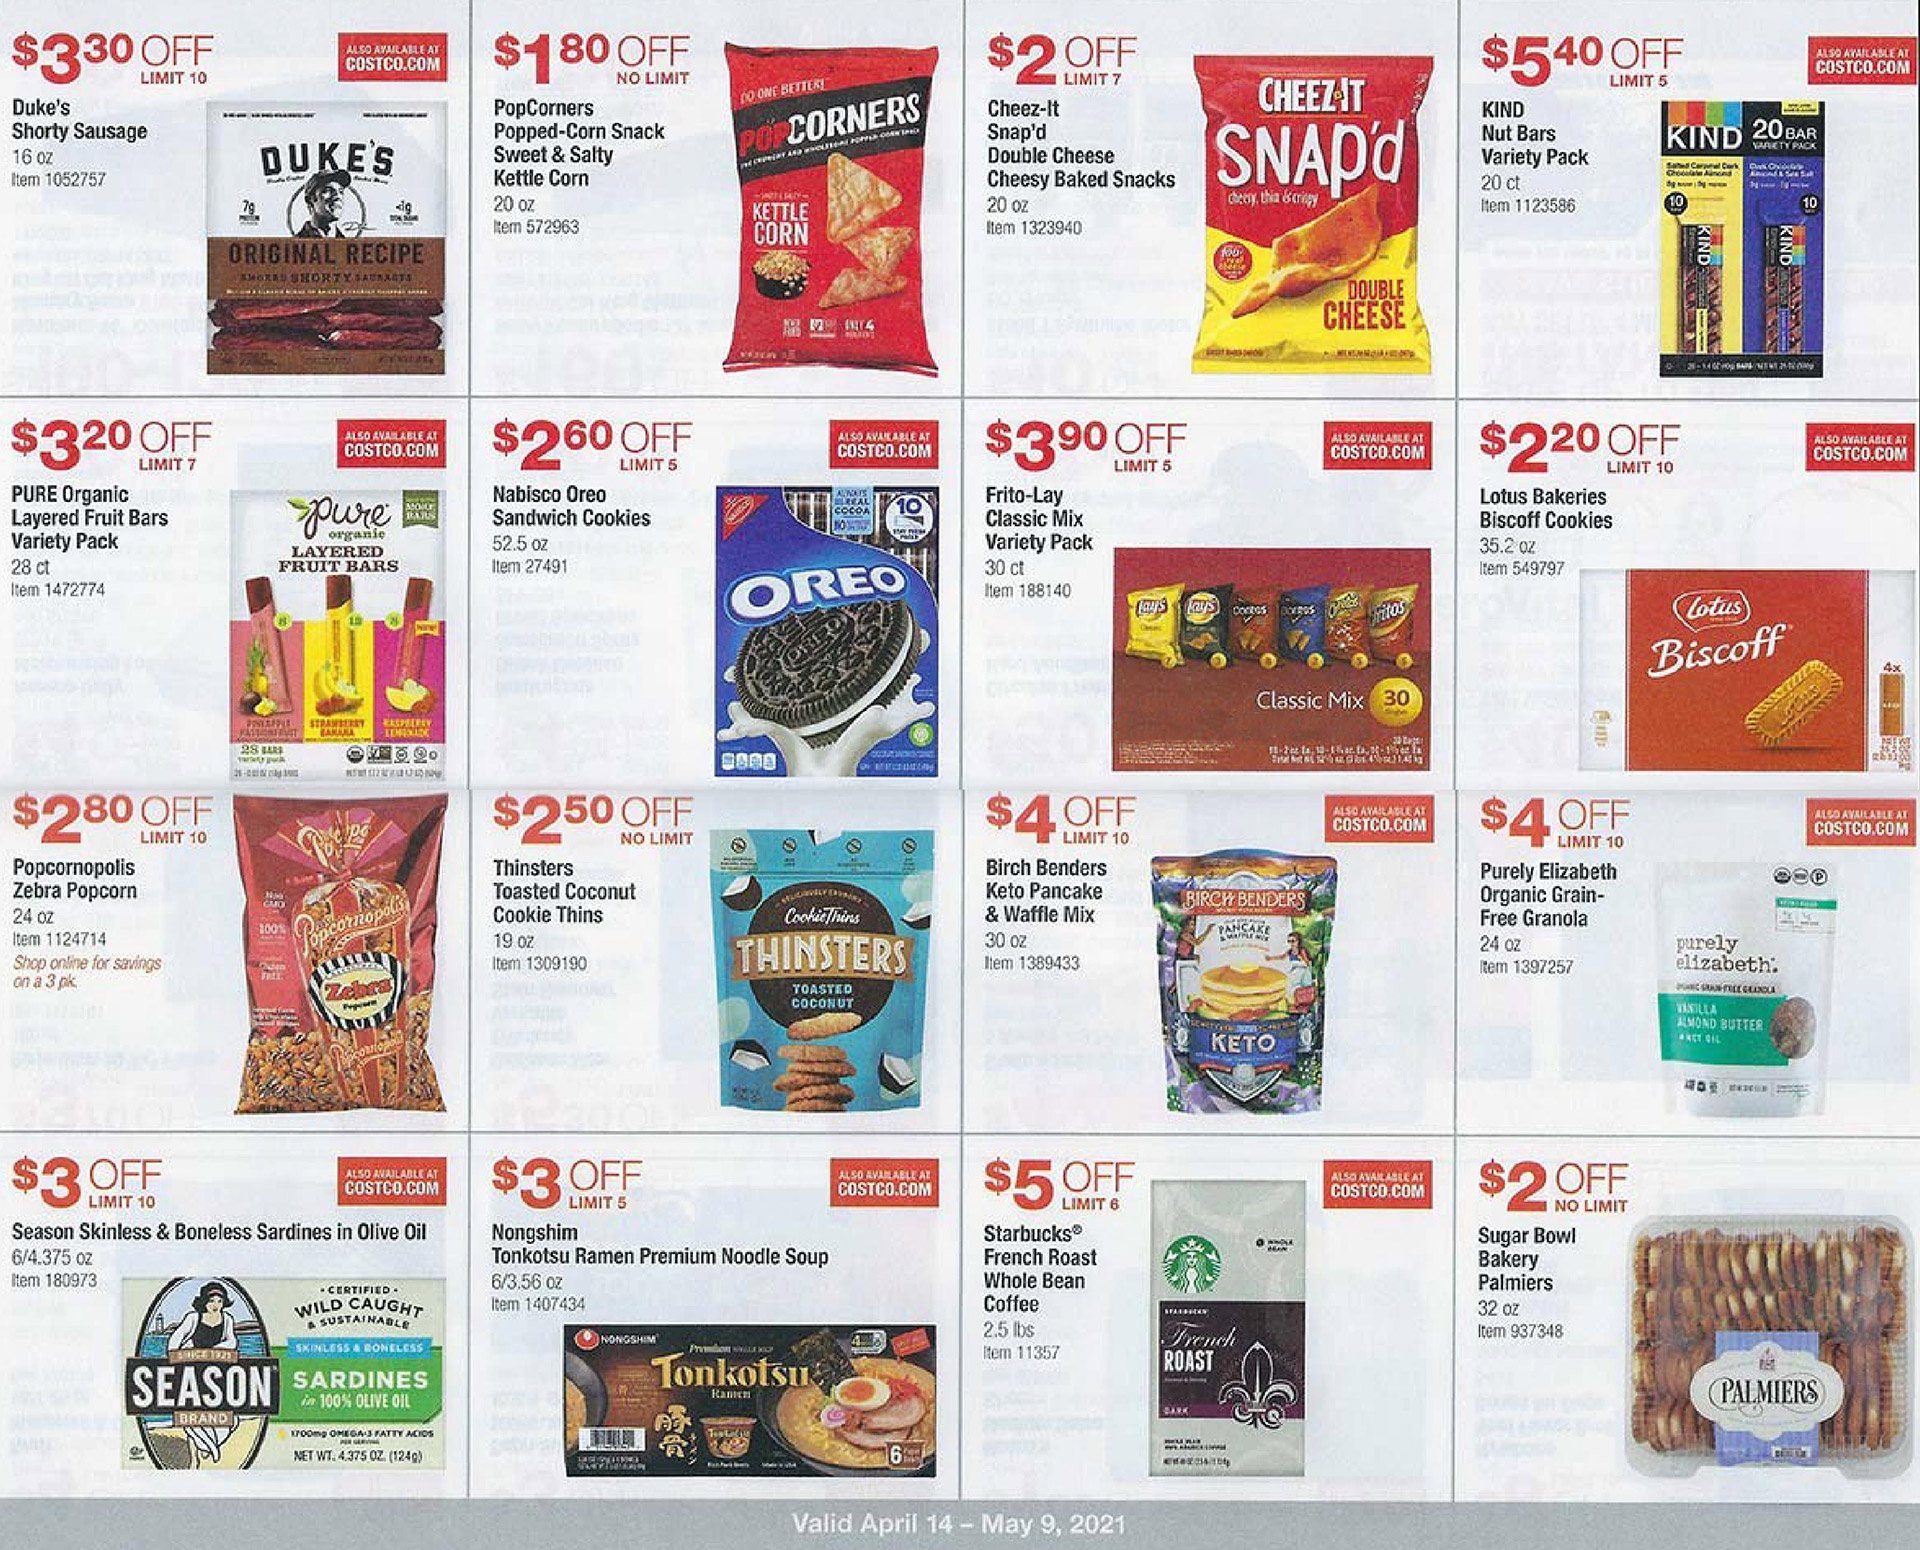 Costco April 2021 Coupon Book and Best Deals of the Month